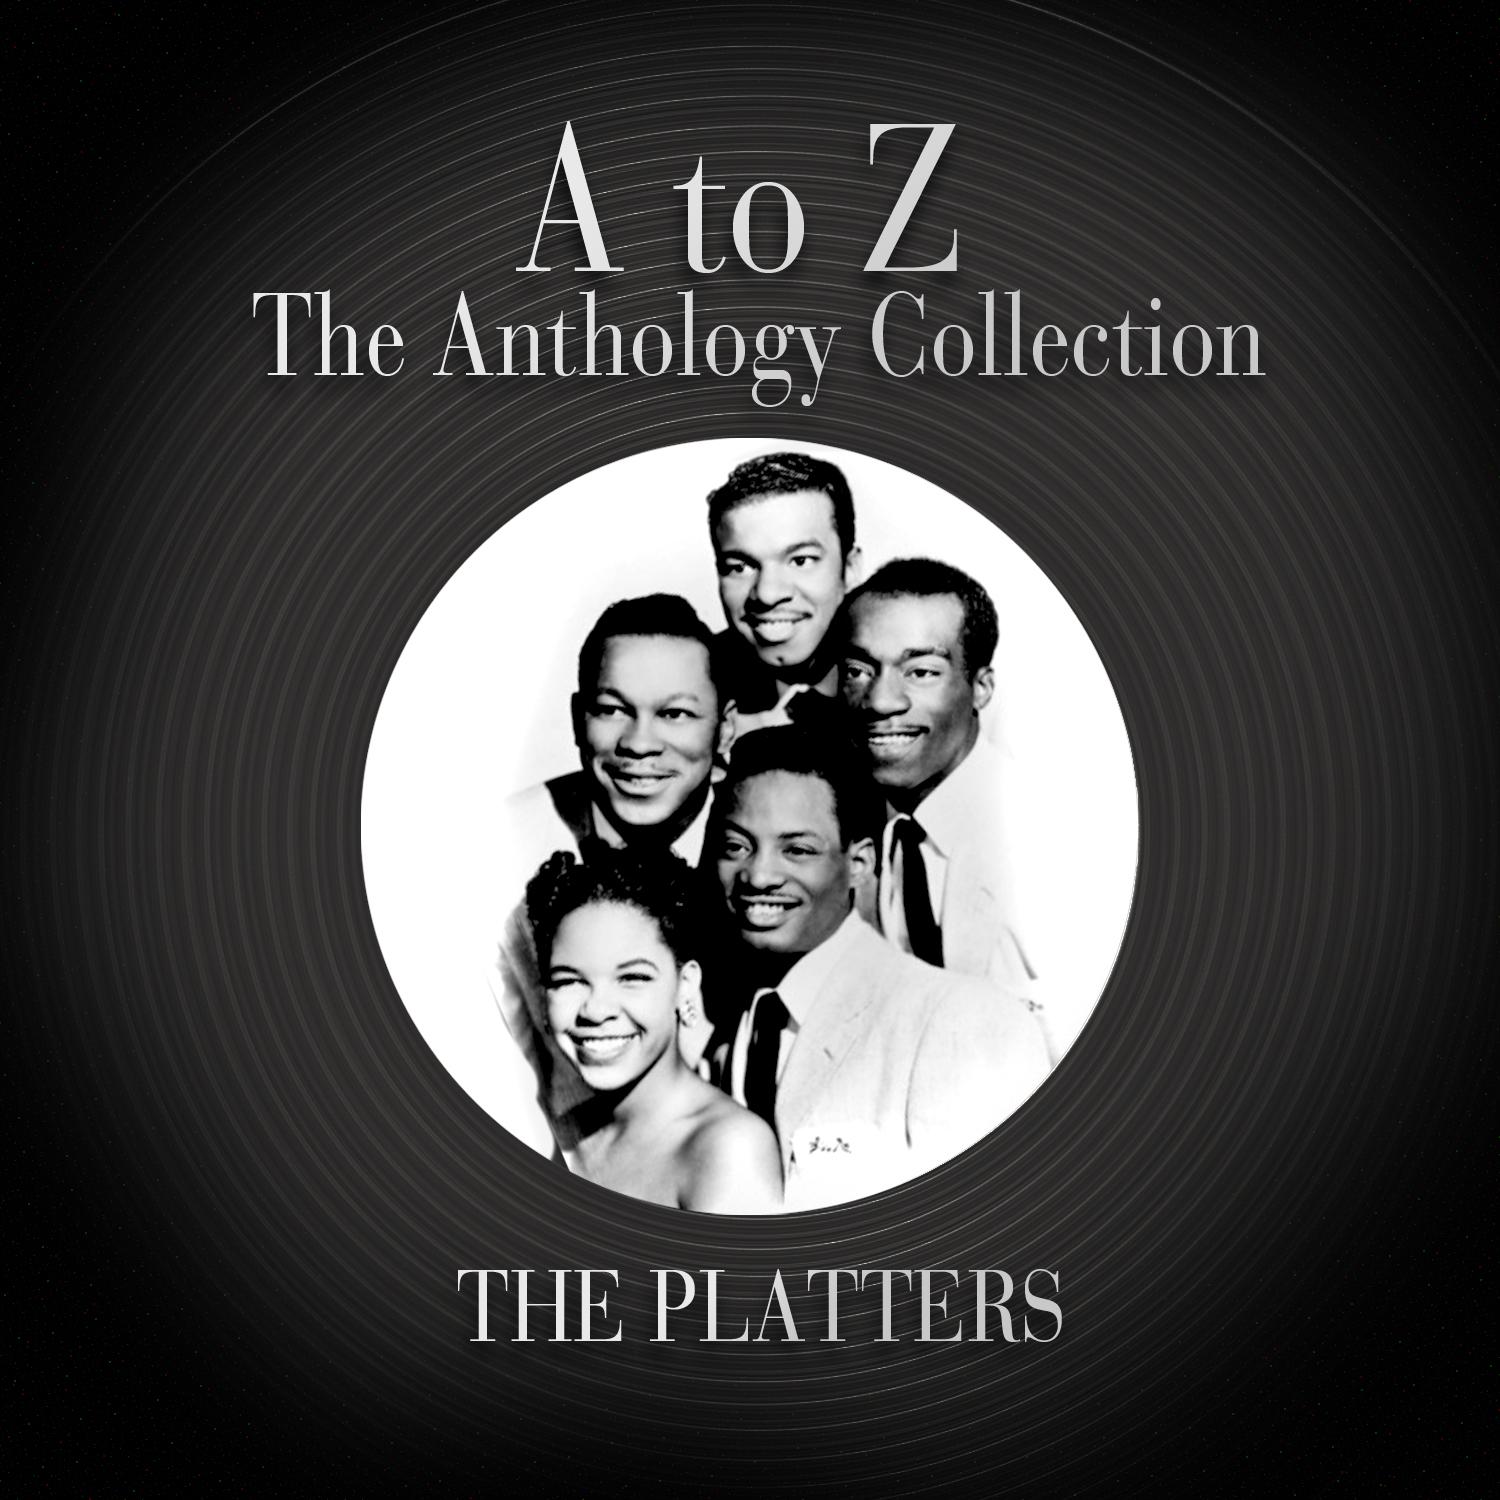 A to Z: The Anthology Collection